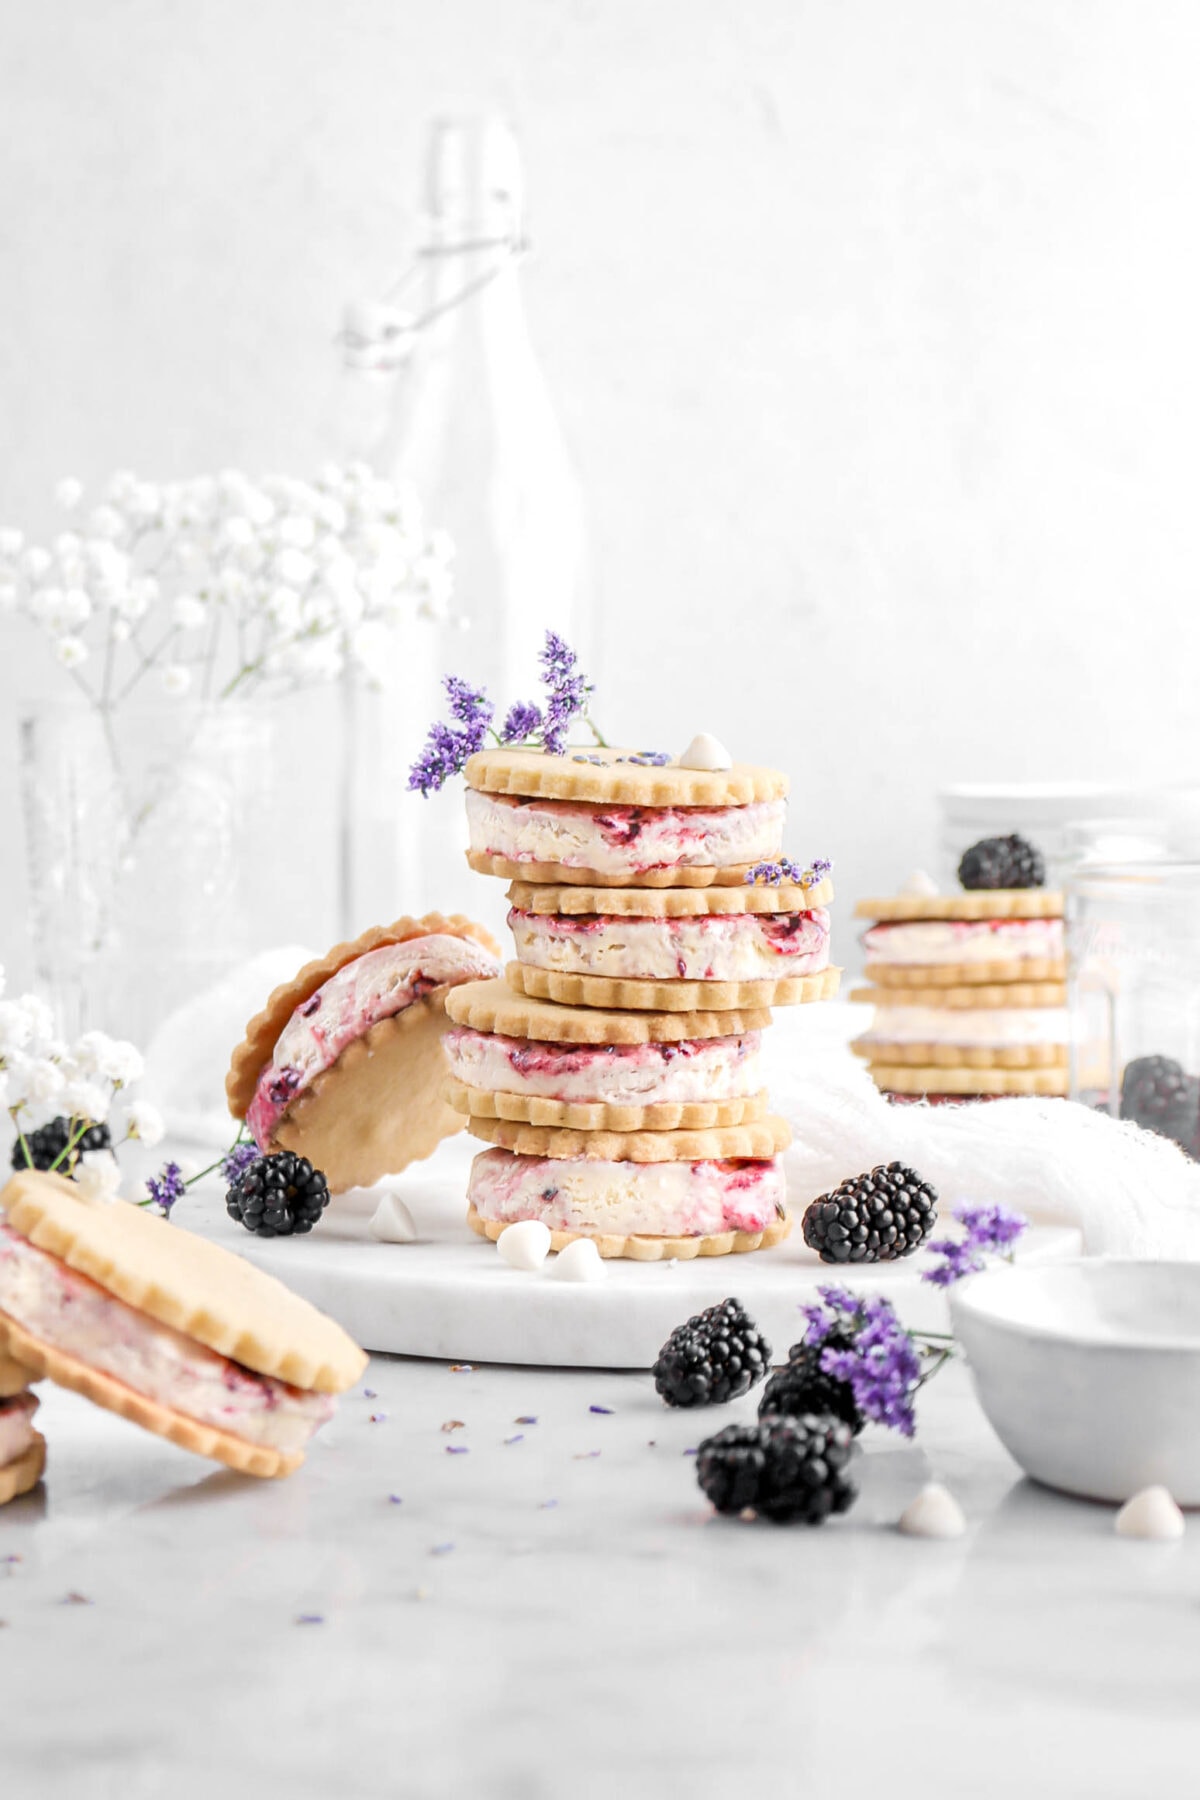 five stacked blackberry white chocolate ice cream sandwiches with another ice cream sandiwch leaning against stack, with more ice cream sandwiches around, fresh blackberries, purple flowers, and white chocolate chips beside stack.